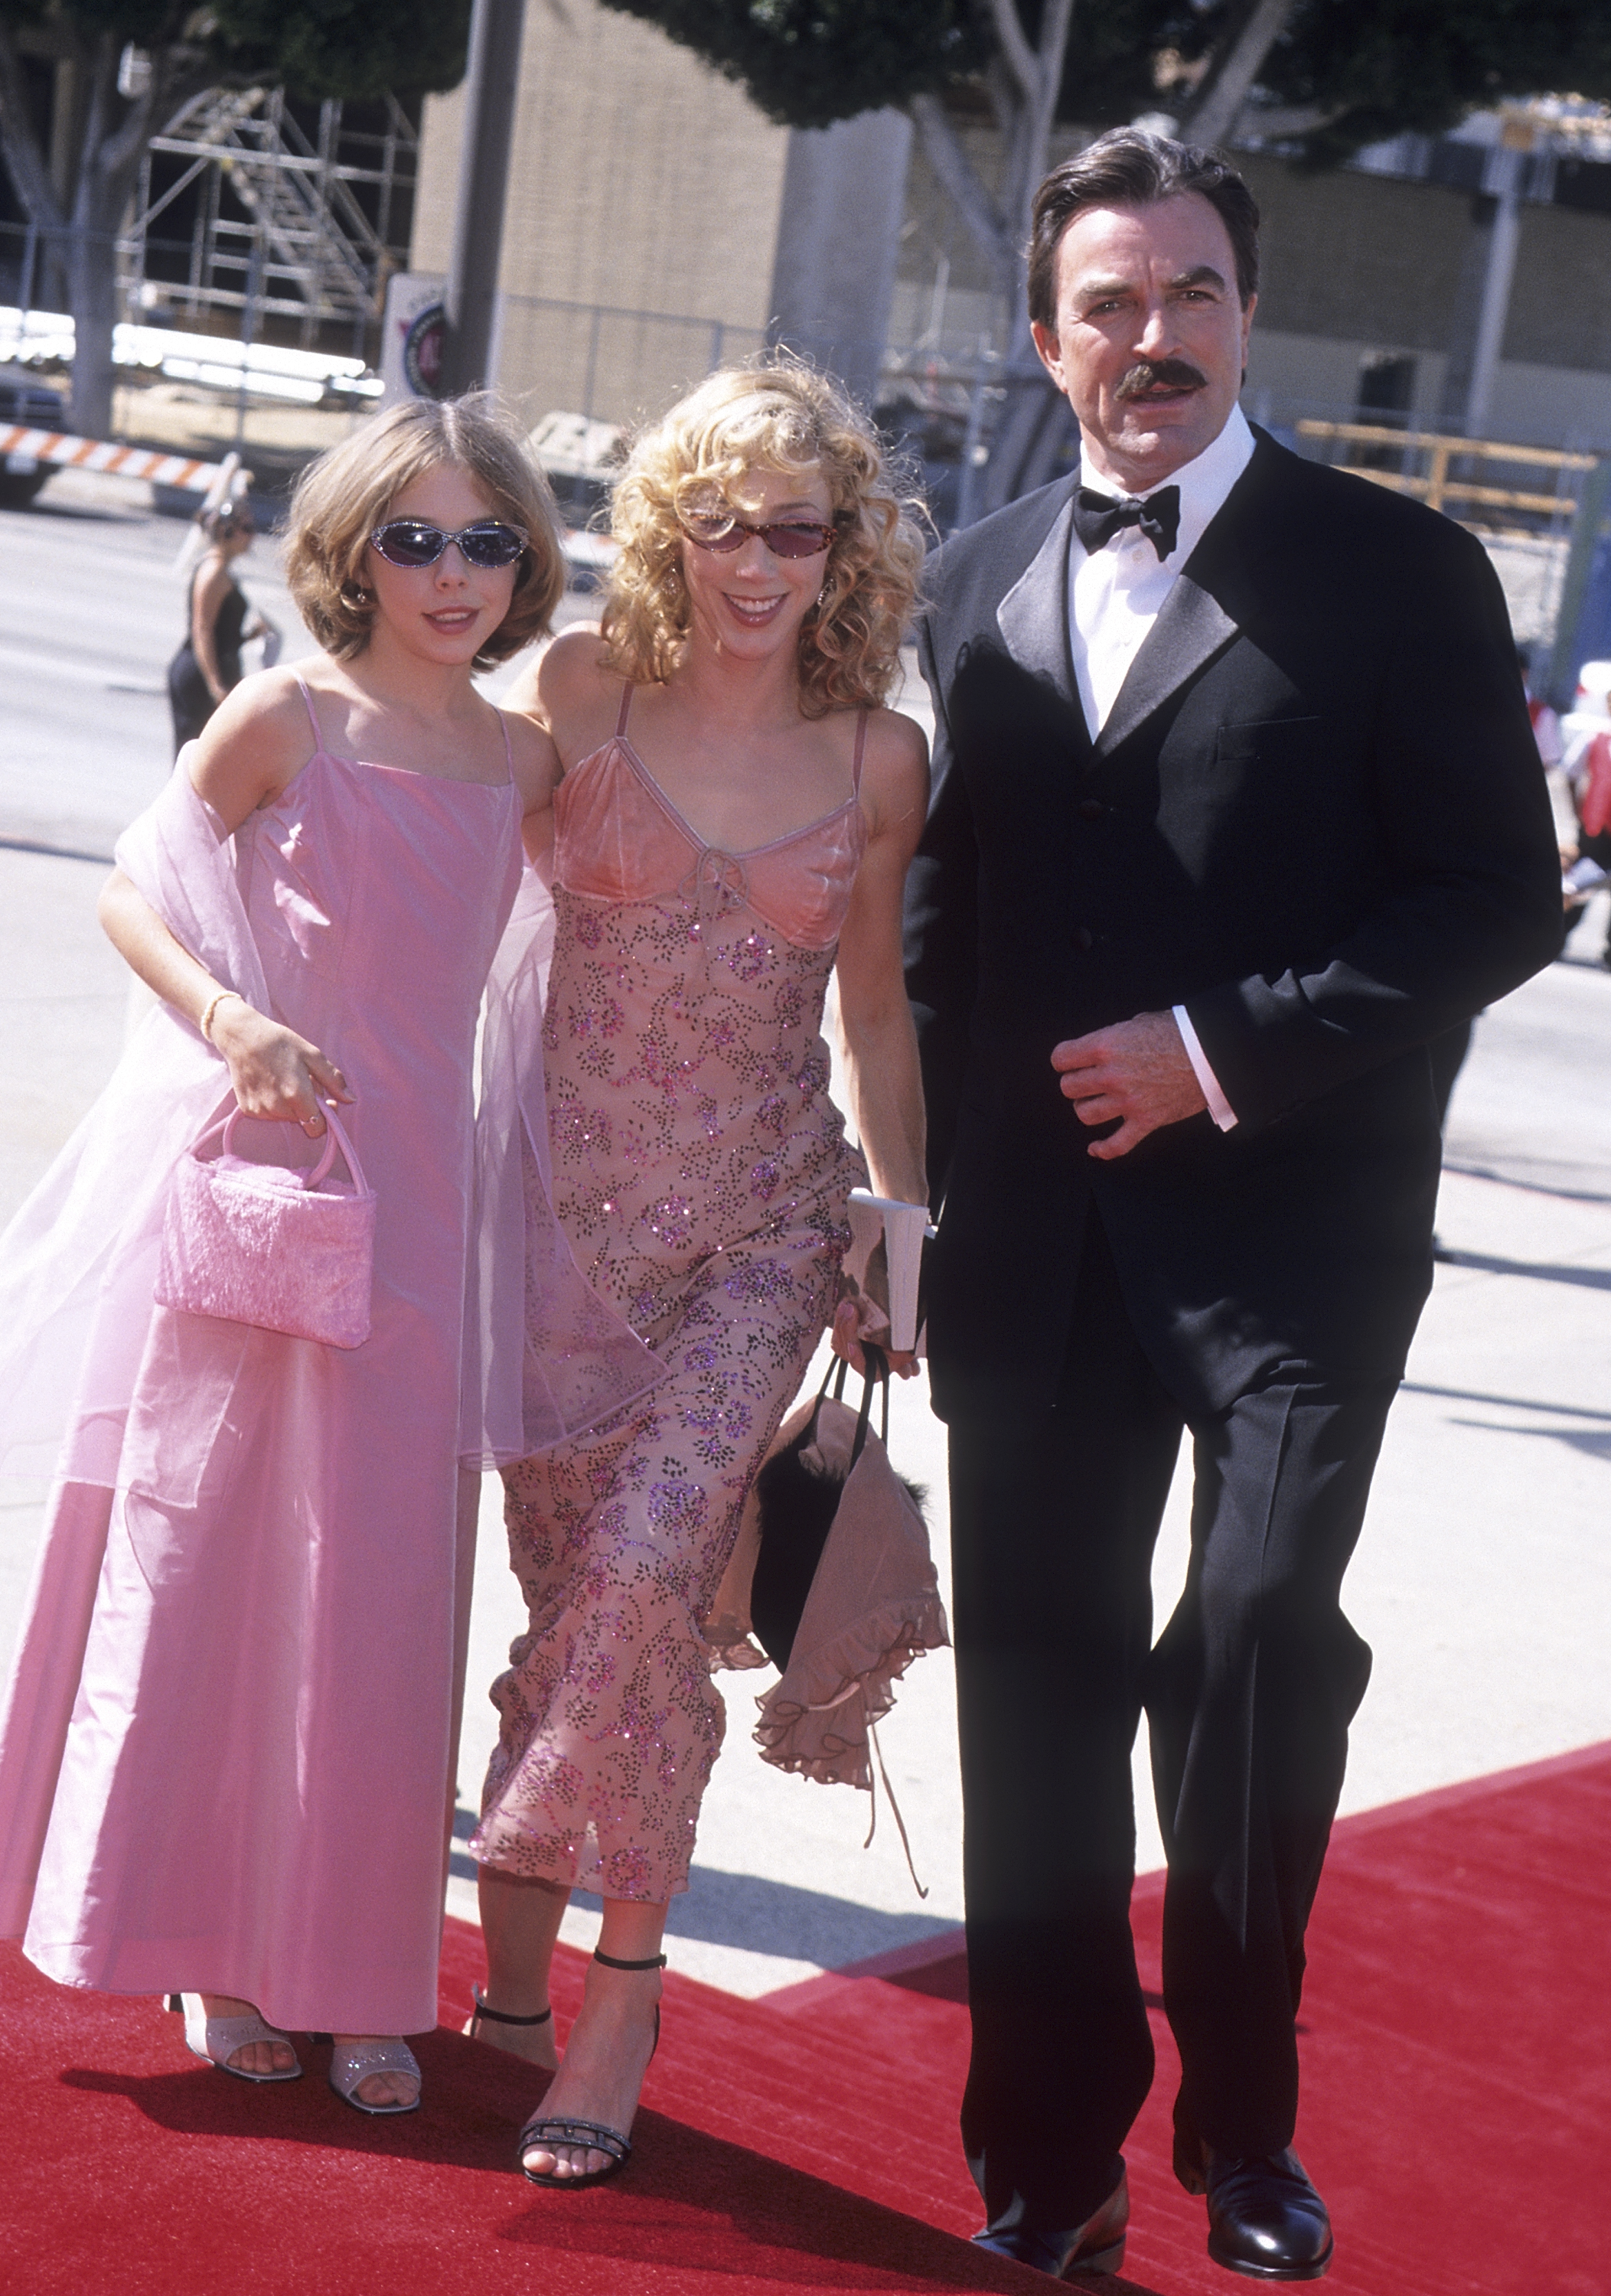 Hannah, Jillie Mack, and Tom Selleck  attend the 52nd Annual Primetime Emmy Awards - Creative Arts Emmy Awards in Pasadena, California on August 26, 2000. | Source: Getty Images